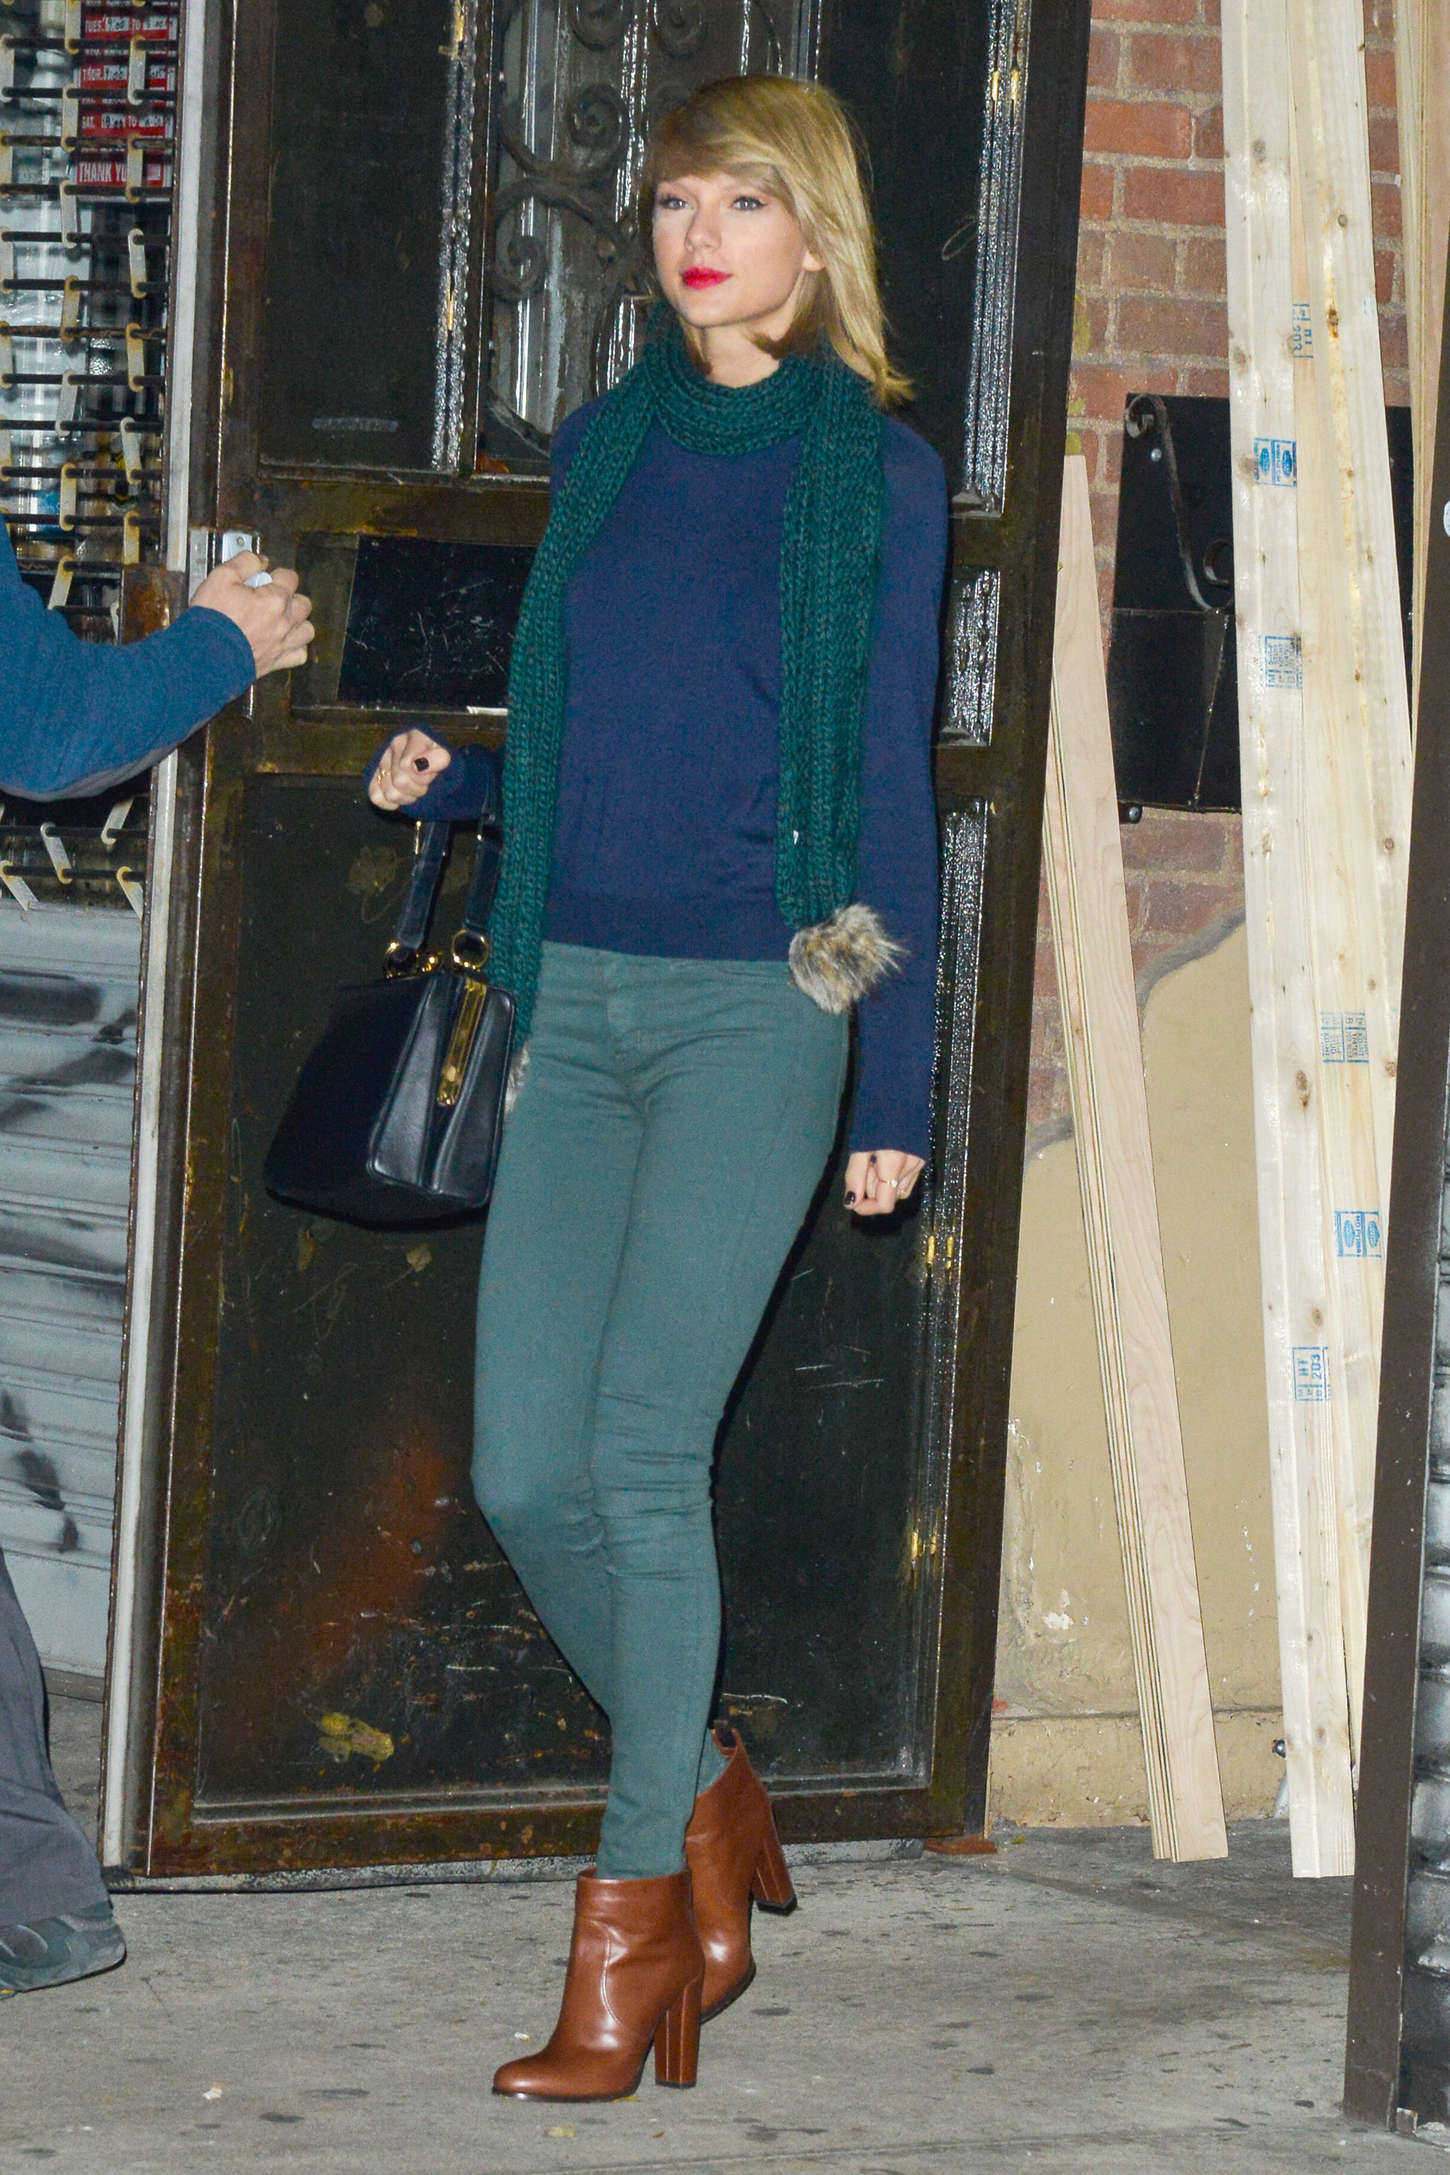 Pictures Of Taylor Swift In Tight Blue Jeans - Celebrity Gossip: Taylor ...